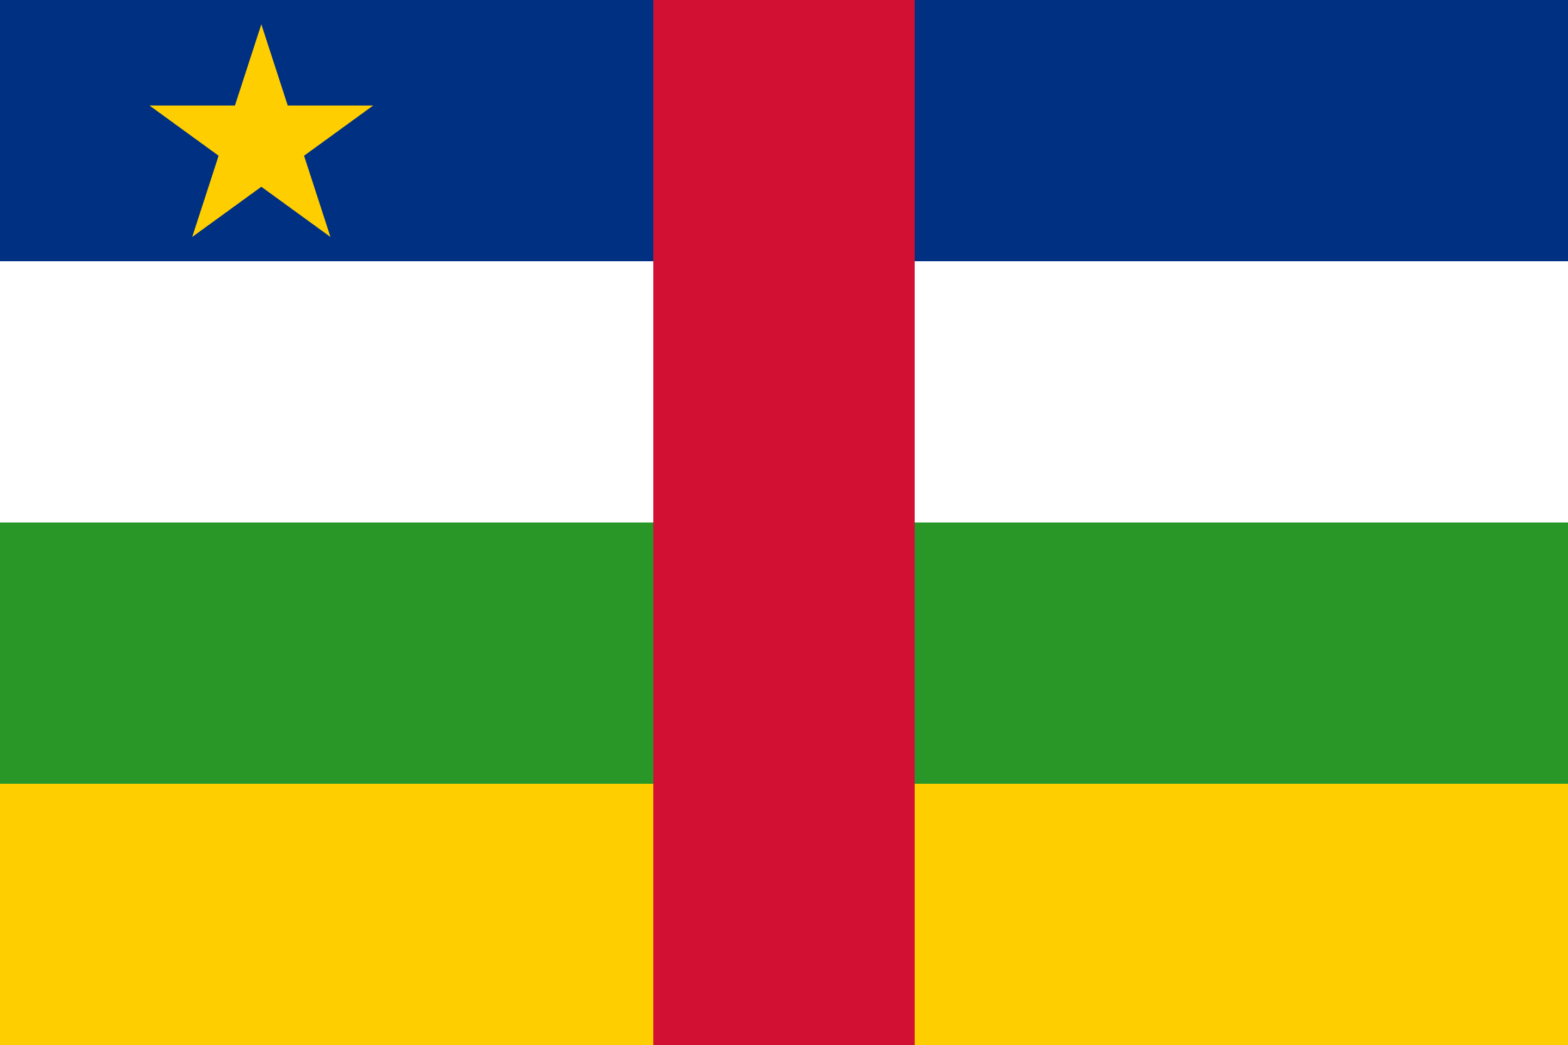 USCRI Policy – Addressing Forced Displacement in the Central African Republic (CAR)